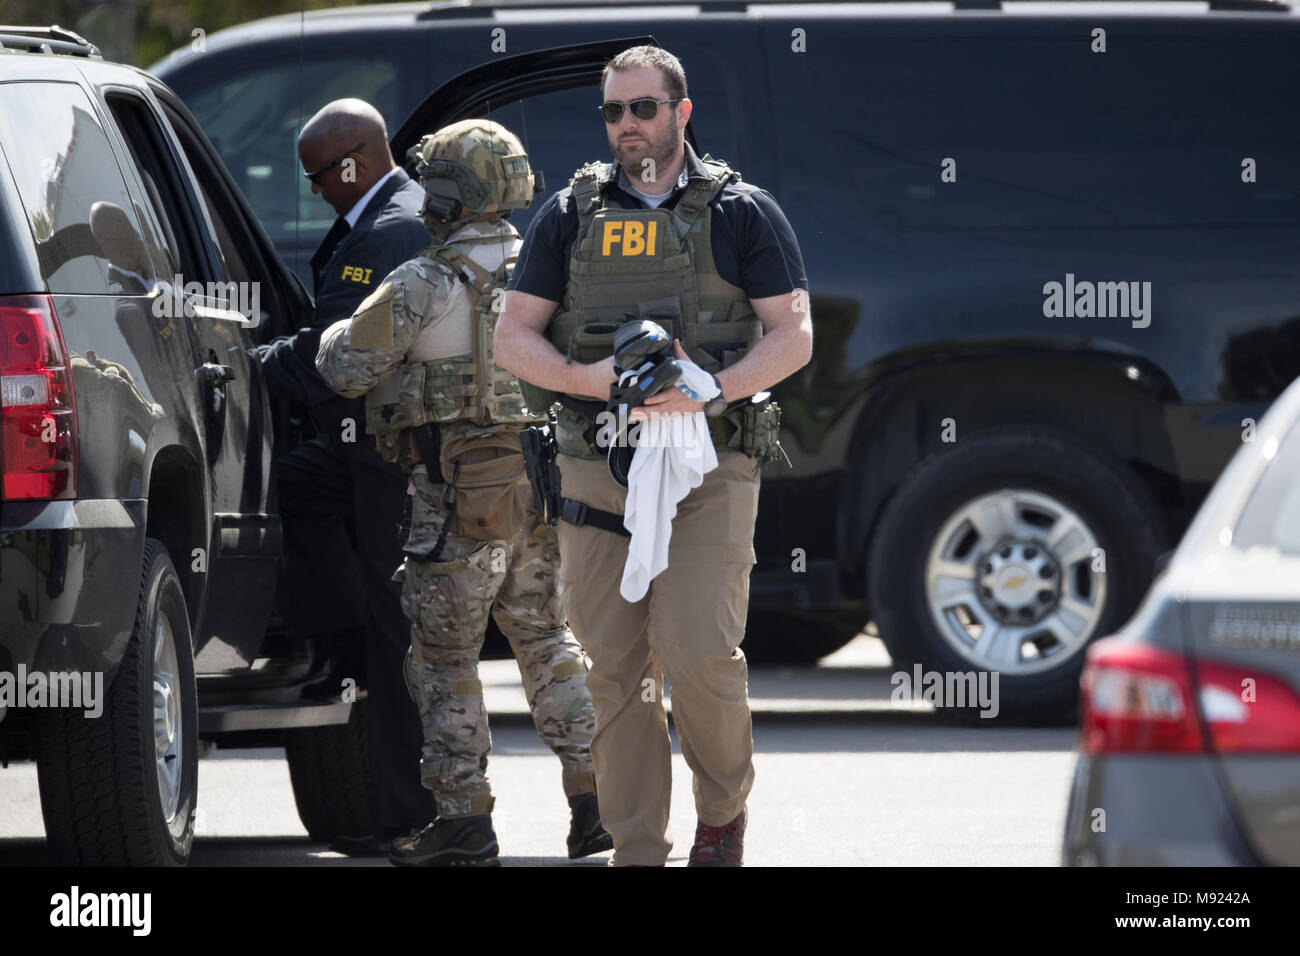 FBI agents help secure the Pflugerville, TX, neighborhood around the home of Mark Conditt, who was the suspected serial bomber terrorizing Austin for three weeks. Conditt killed himself earlier in the day during a car chase as officers closed in. Stock Photo